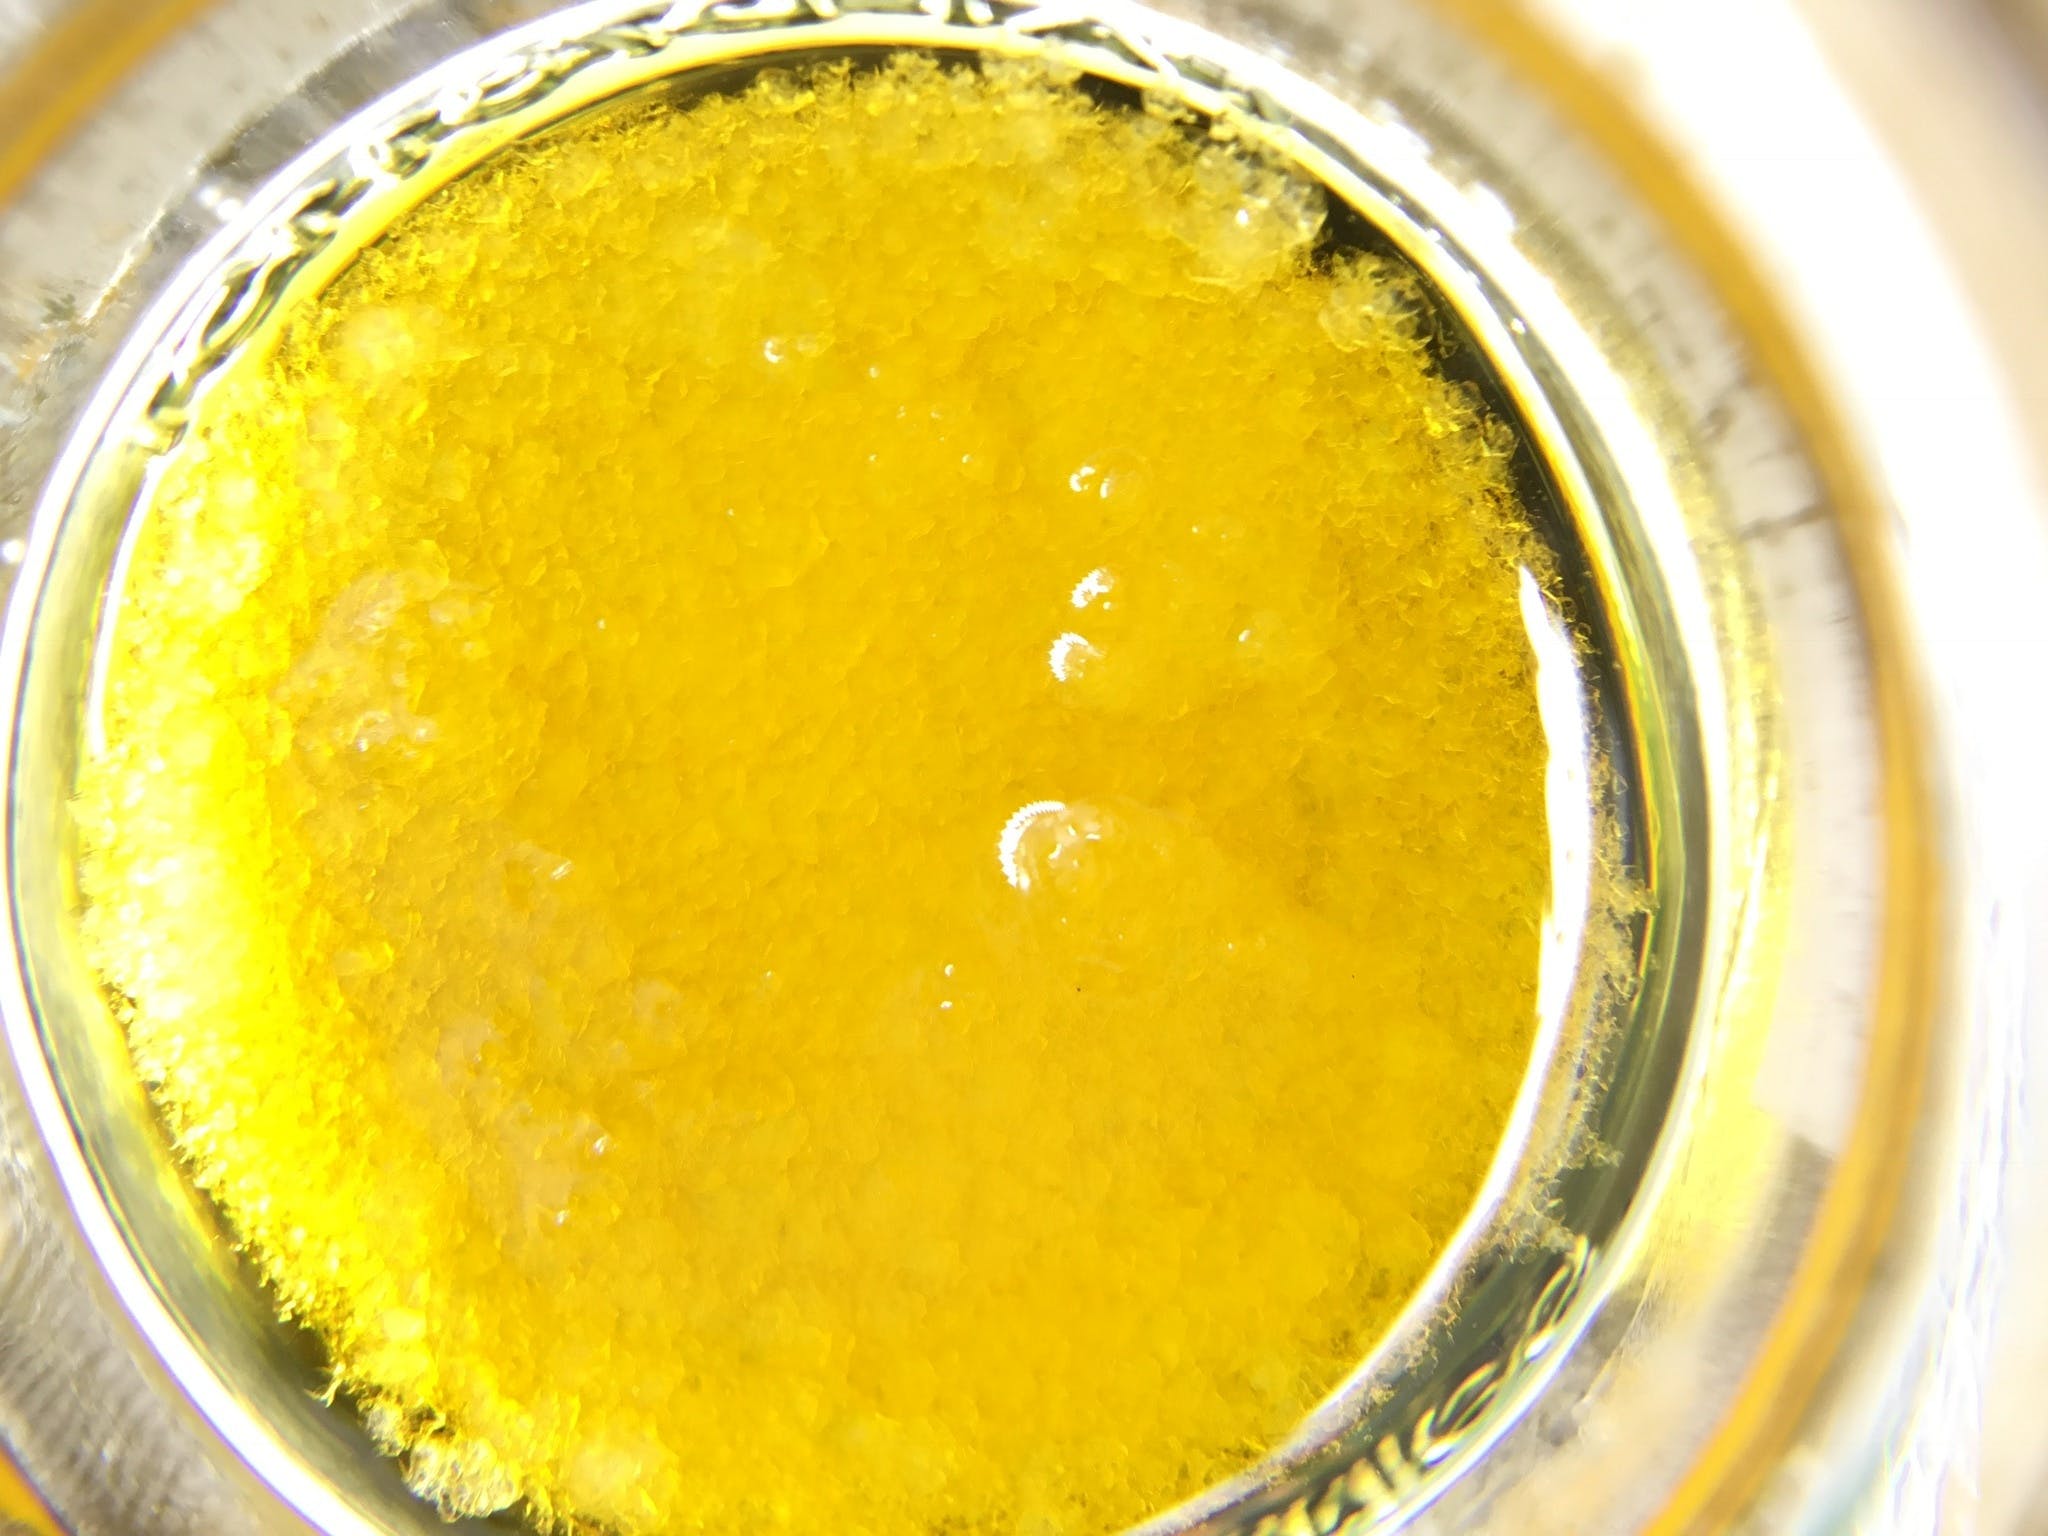 concentrate-arcturus-1g-sauce-blackberry-kush